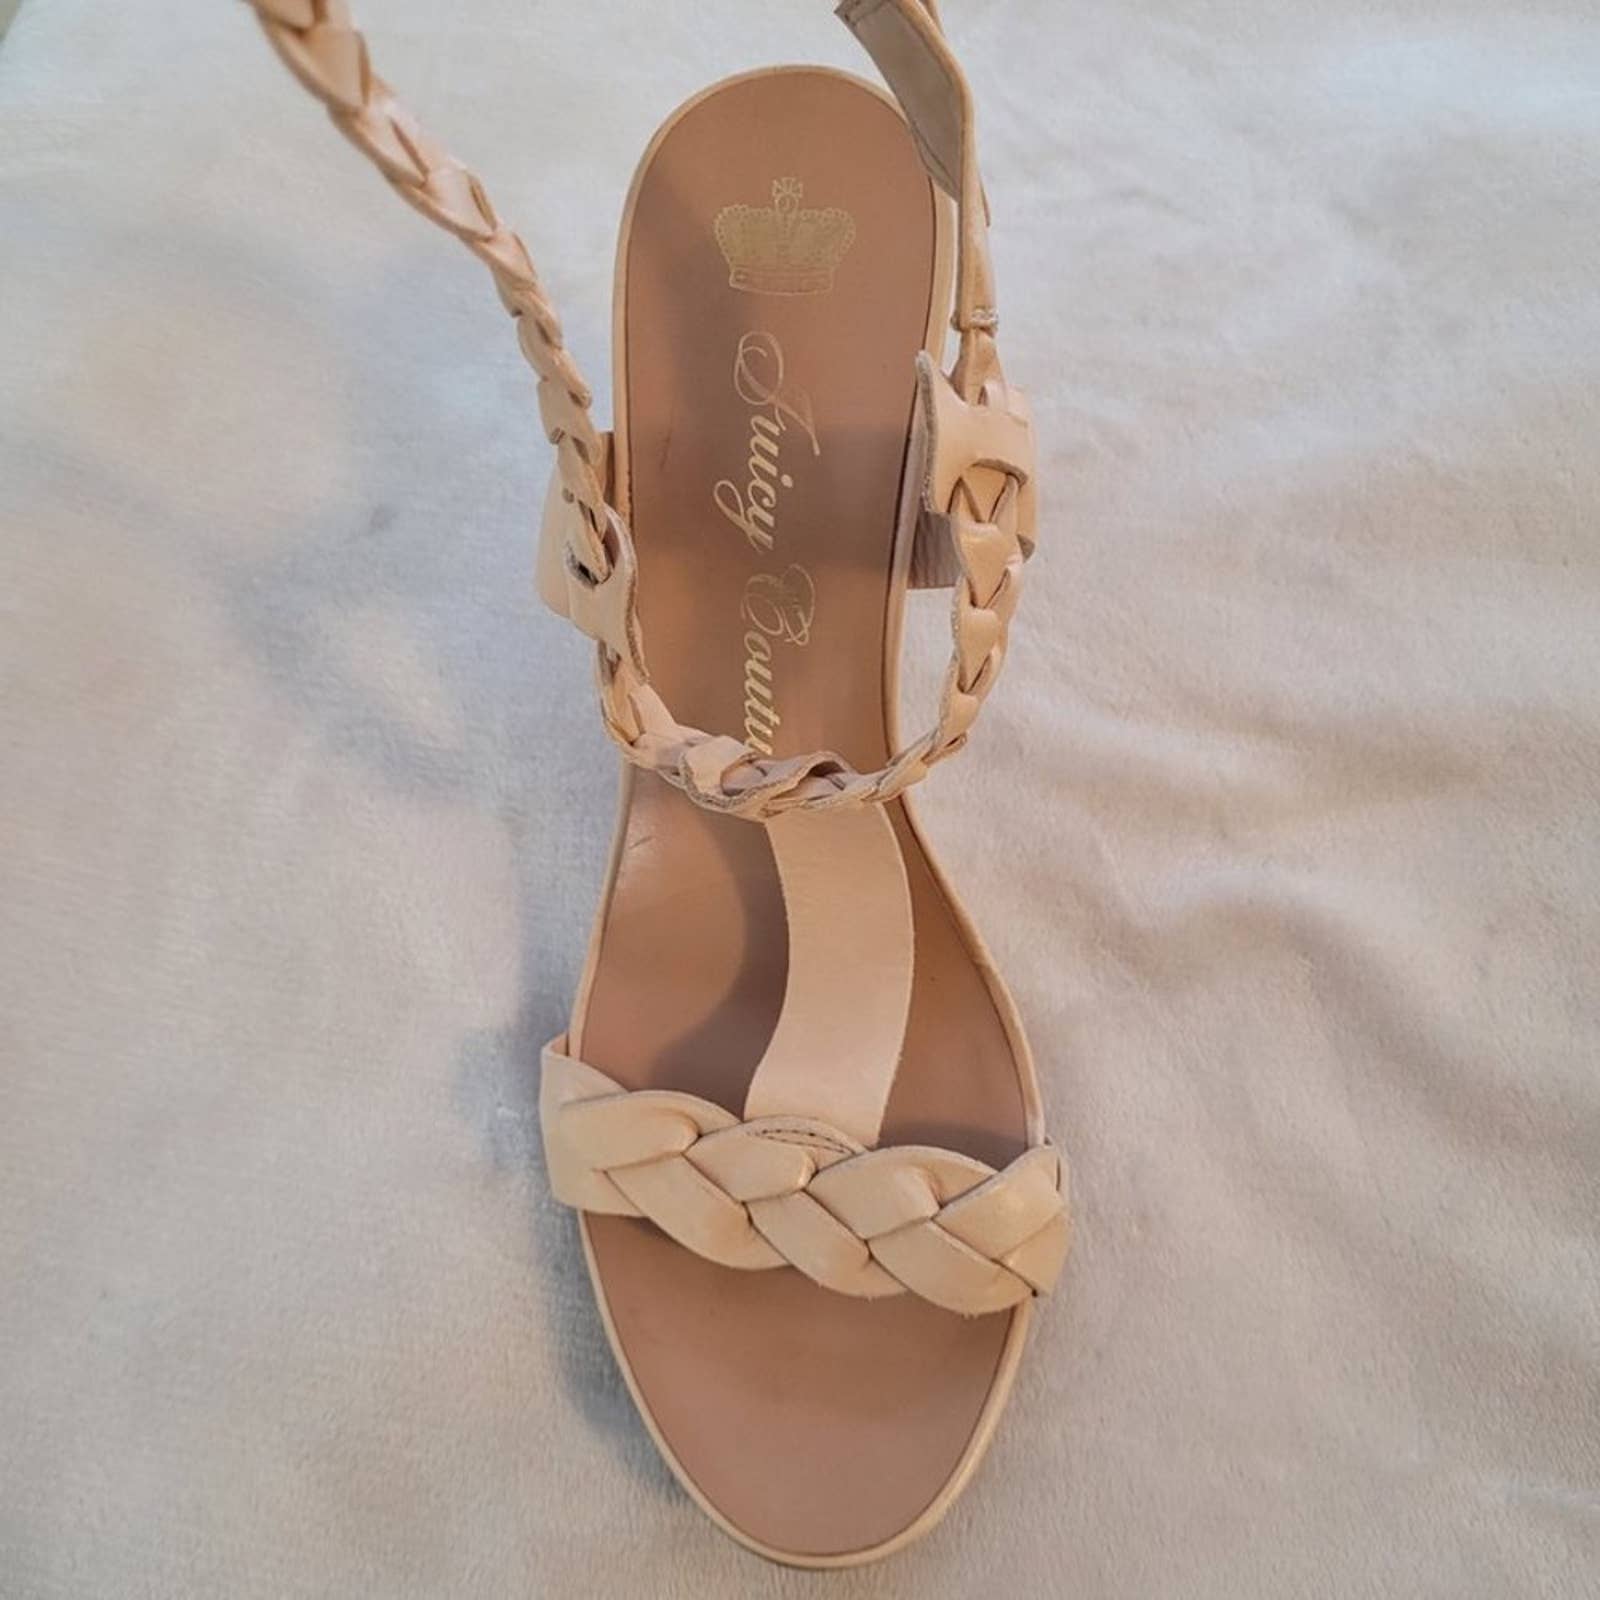 Juicy Couture Double Braided Ankle Leather Sandals - Size 9Markita's ClosetJuicy Couture